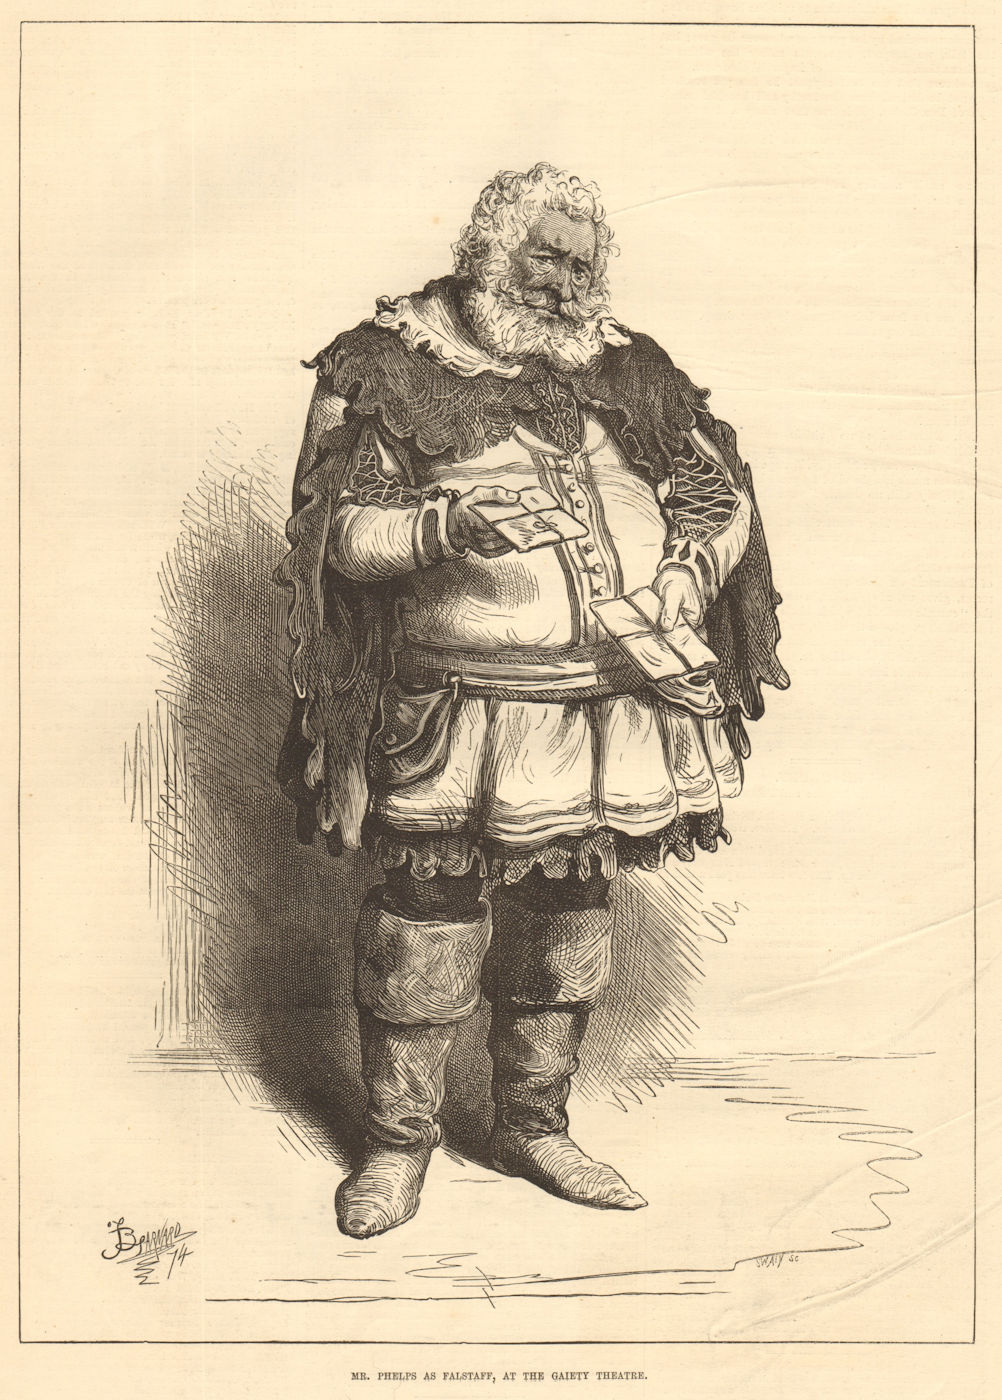 Associate Product Mr. Phelps, as Falstaff, at the Gallery Theatre. Shakespeare 1875 old print